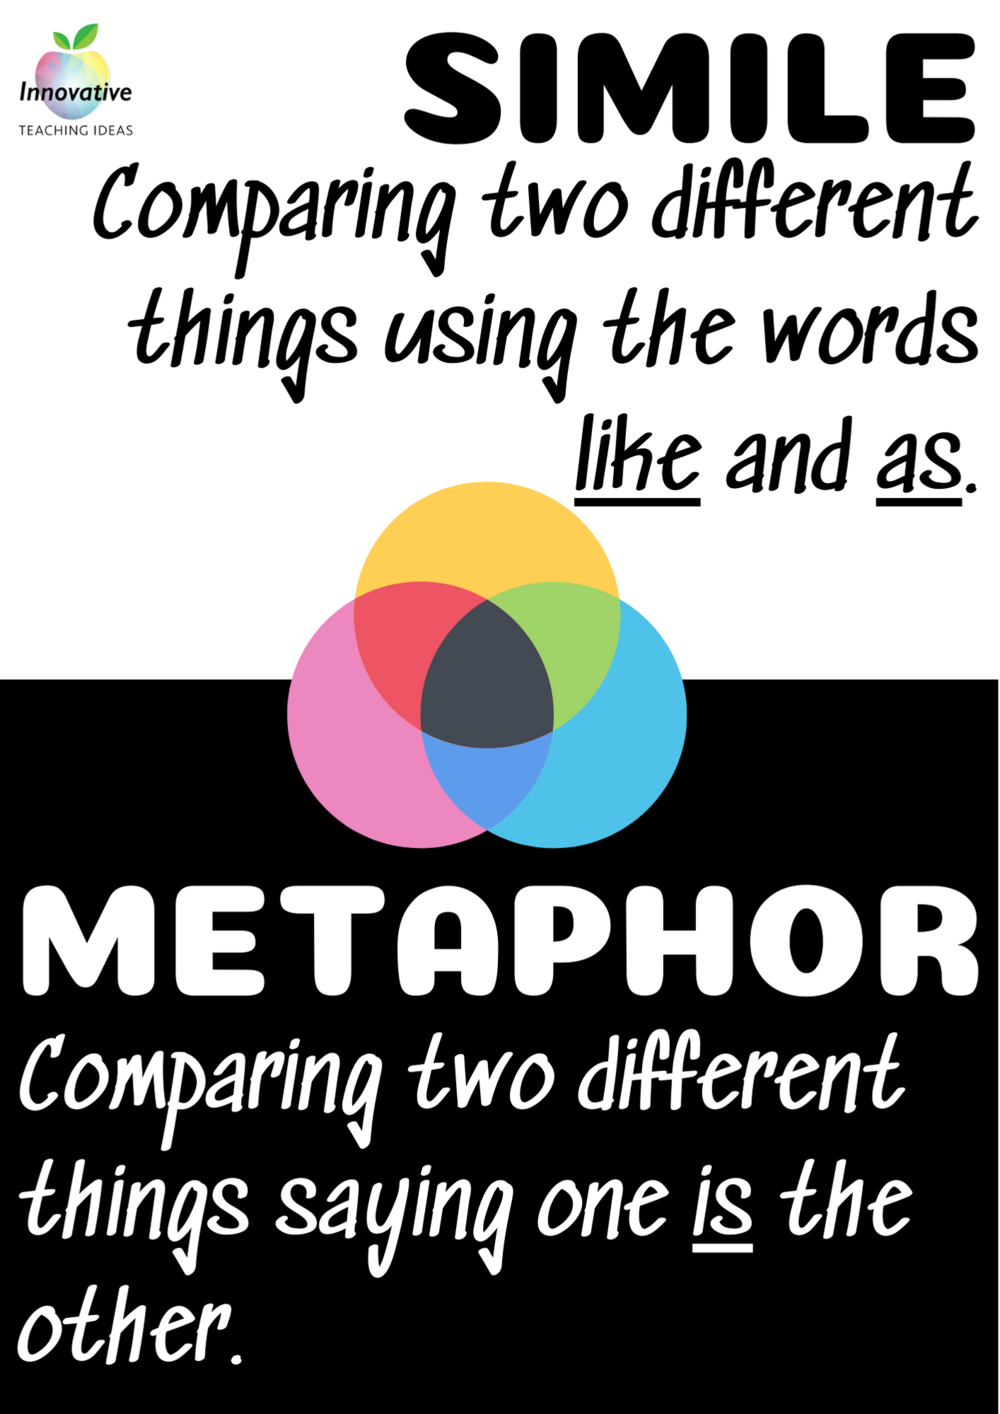 Free simile and metaphor posters — Innovative Teaching Ideas